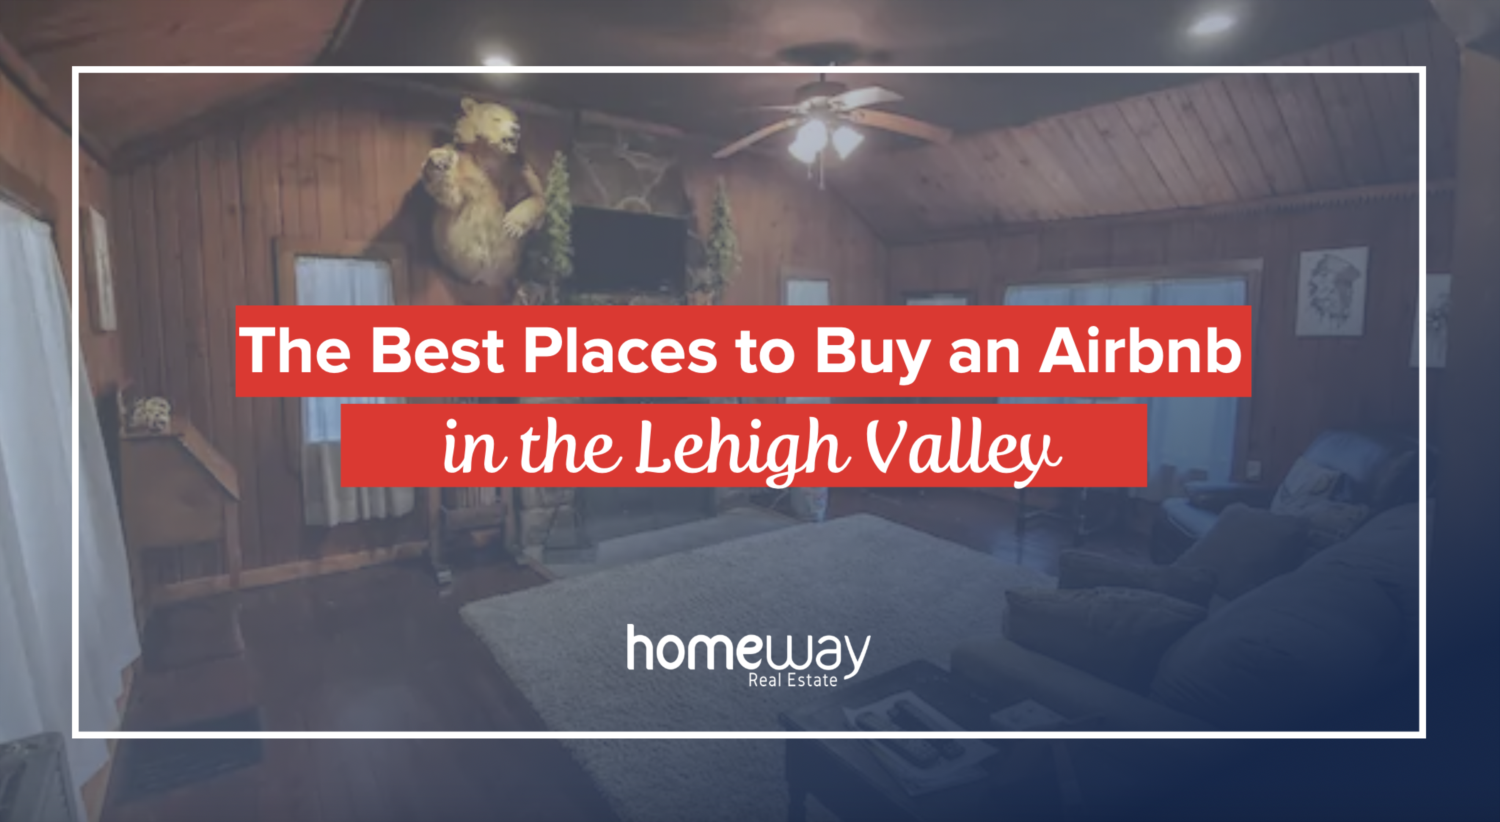 The Best Places to Buy an Airbnb in the Lehigh Valley